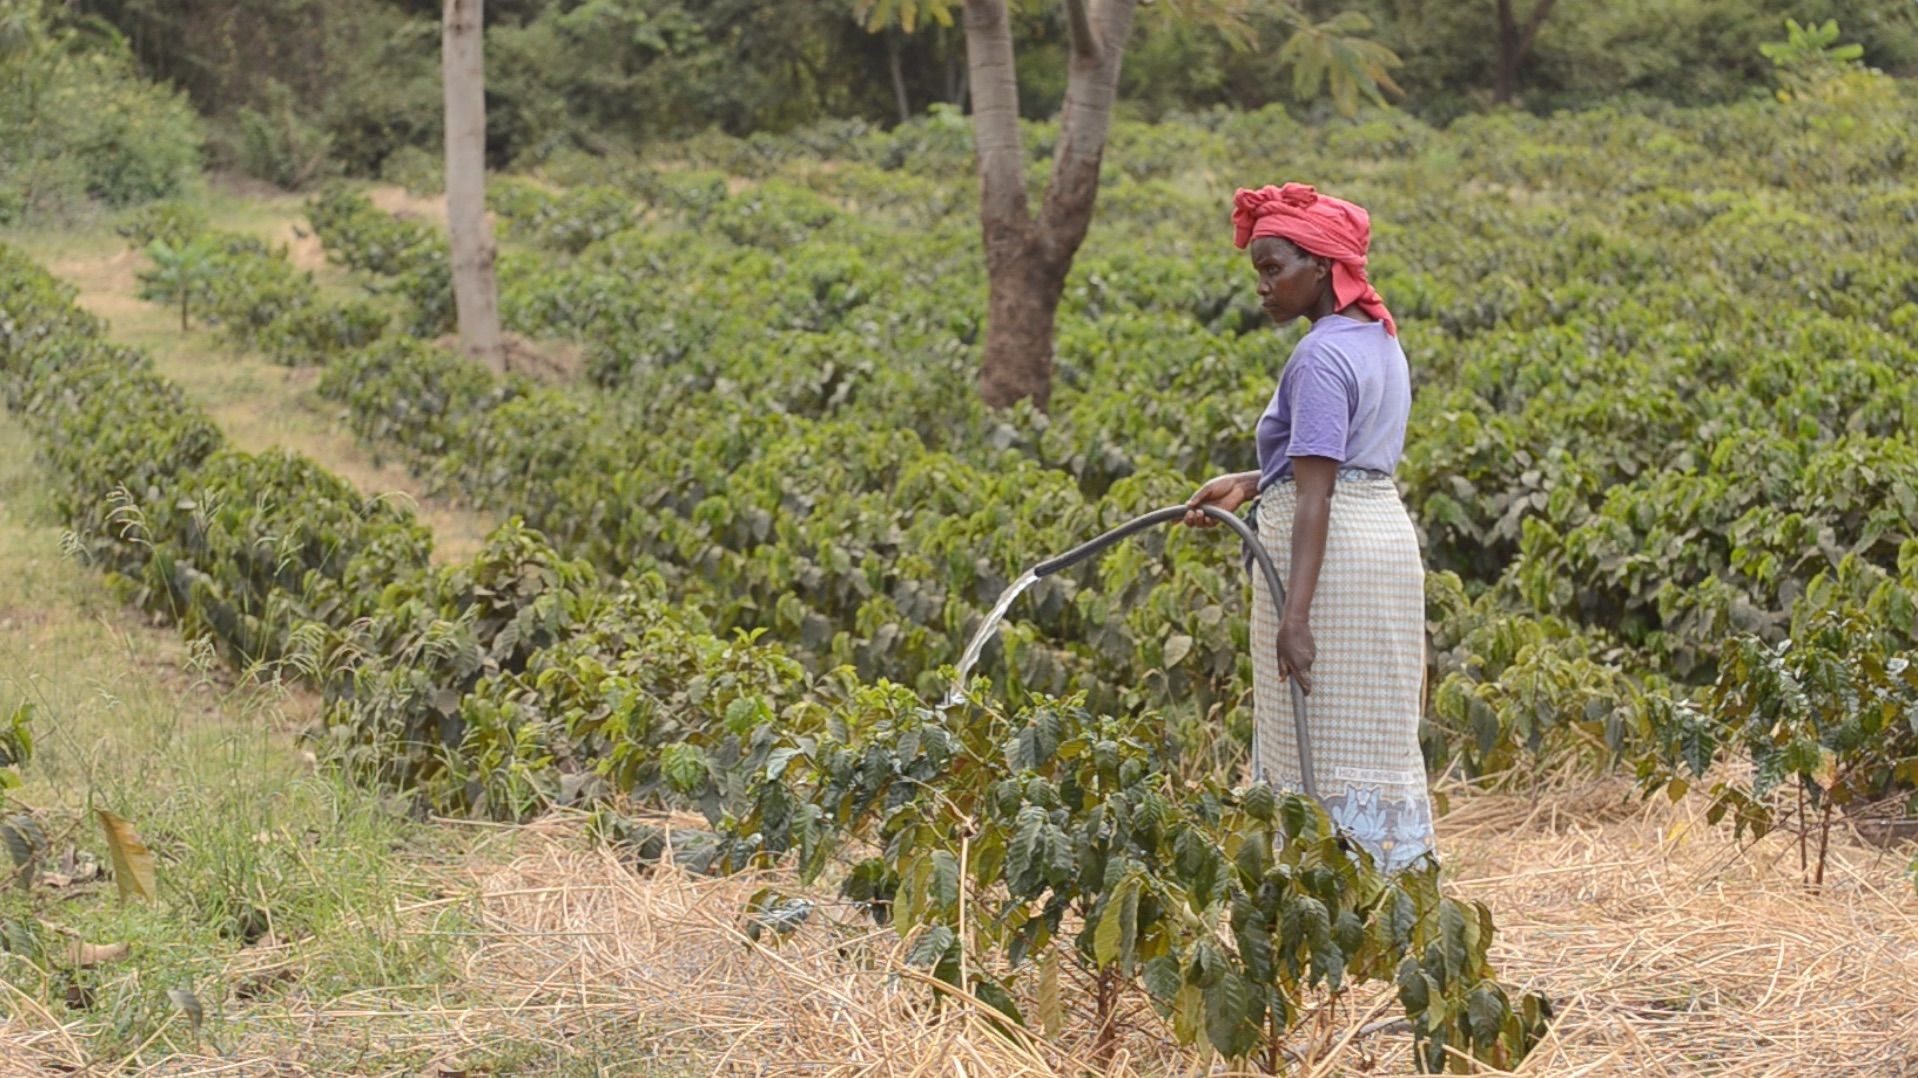 Irrigation helps some farmers cope, but in the long term will not save them. 